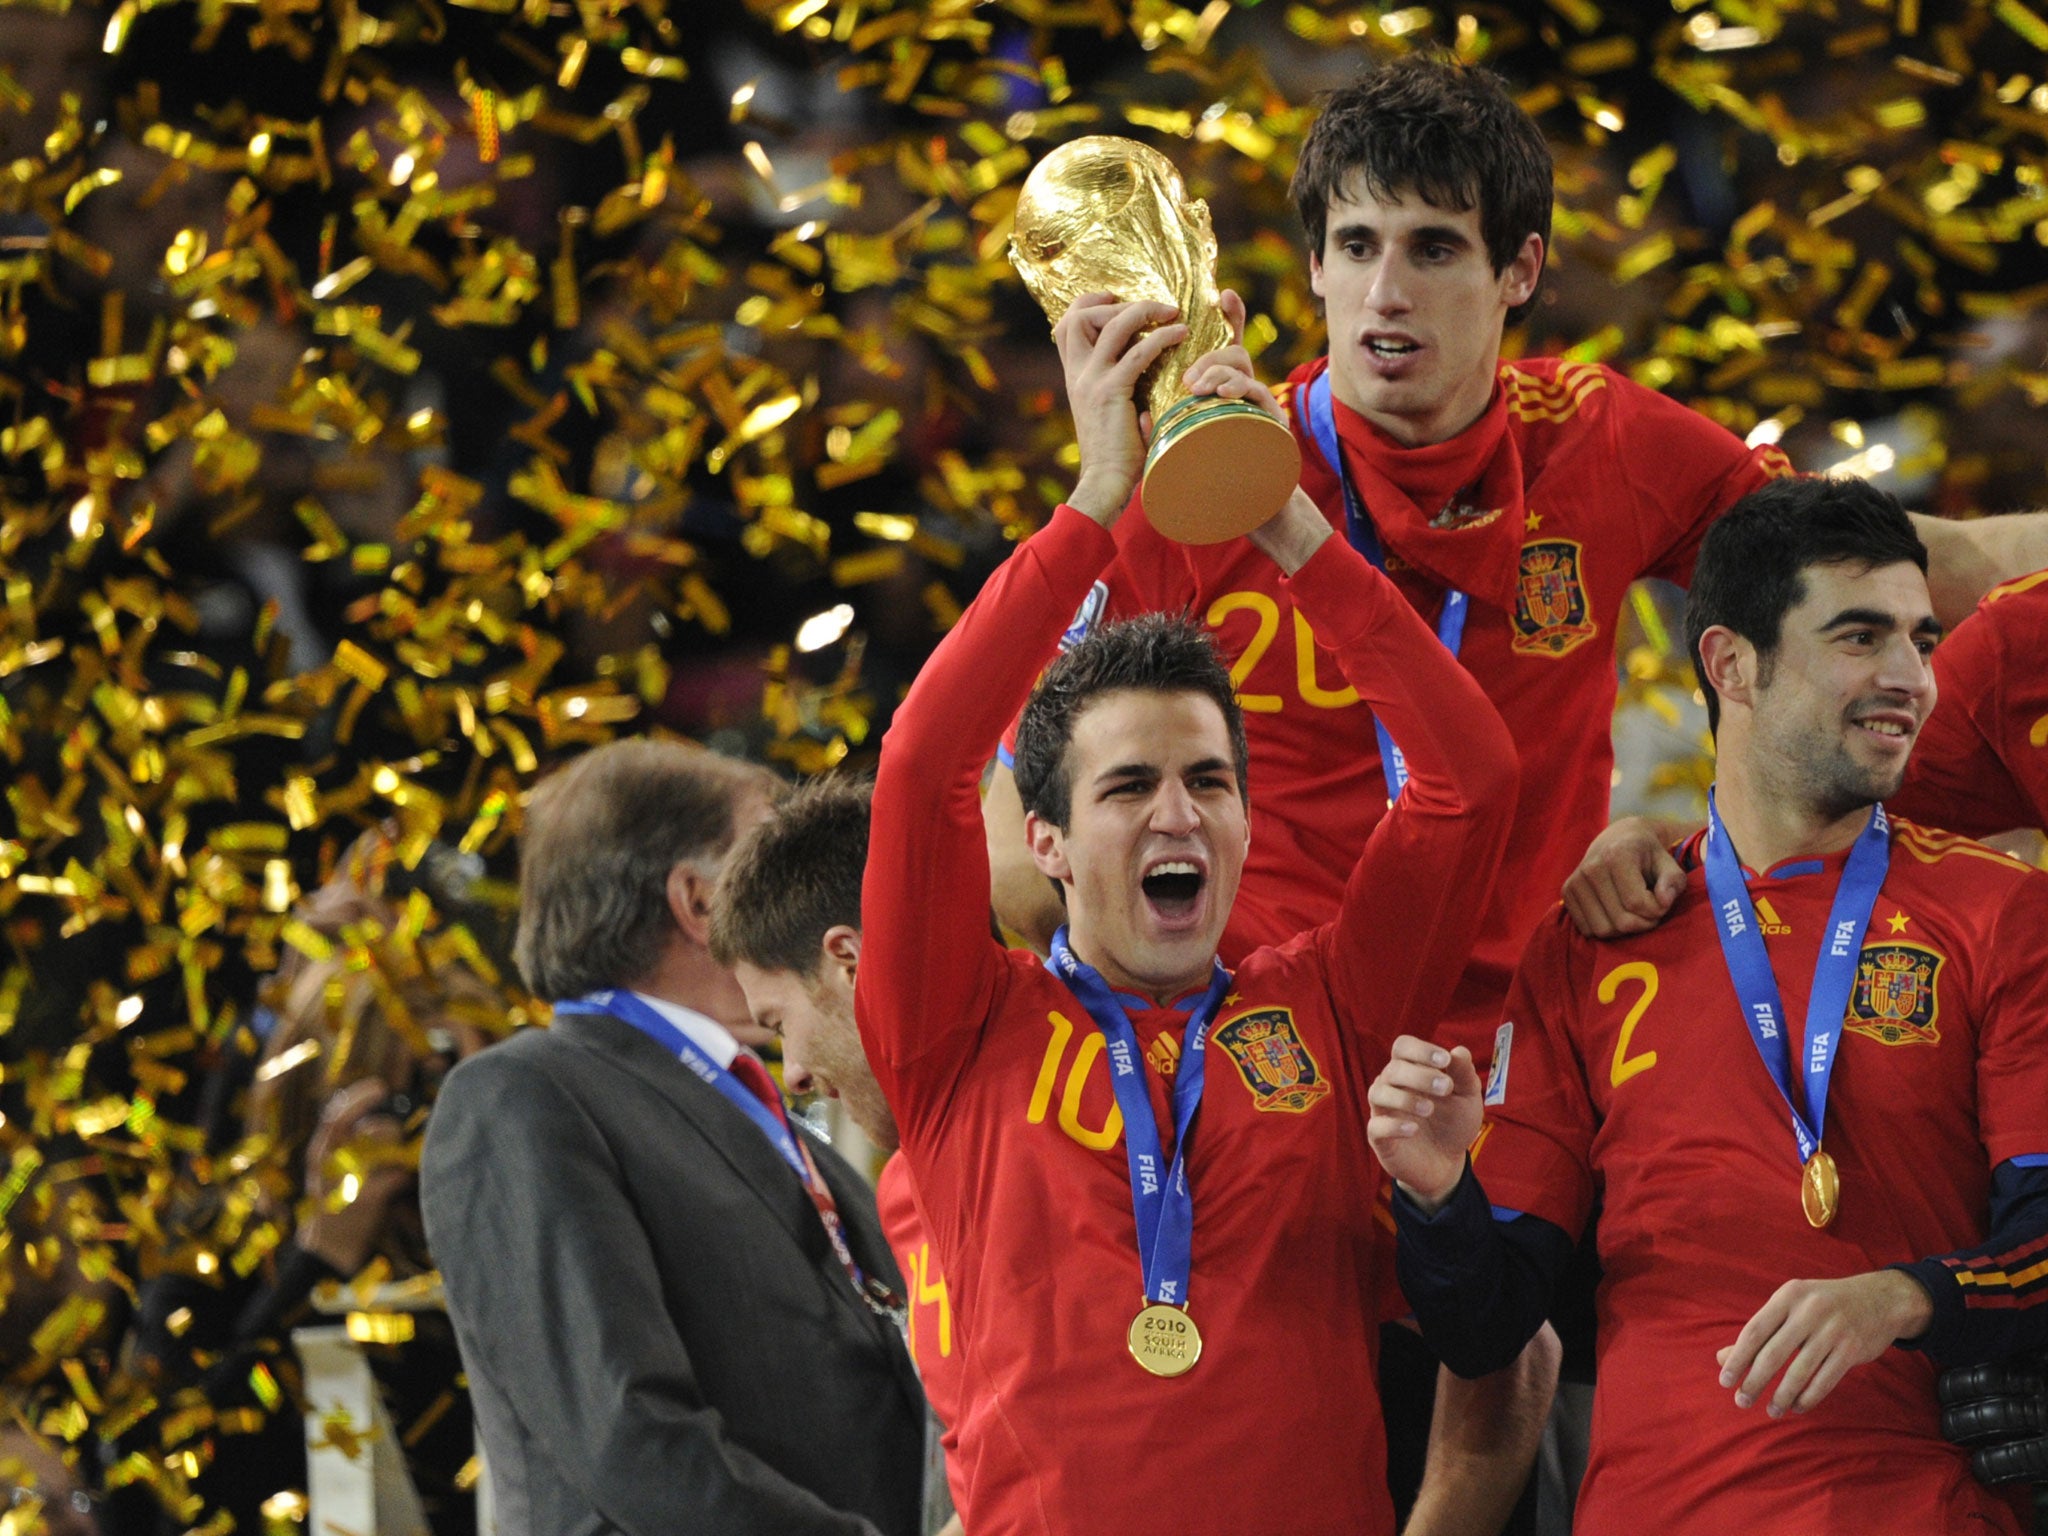 Cesc Fabregas hoists the World Cup aloft after Spain won the tournament in South Africa in 2010